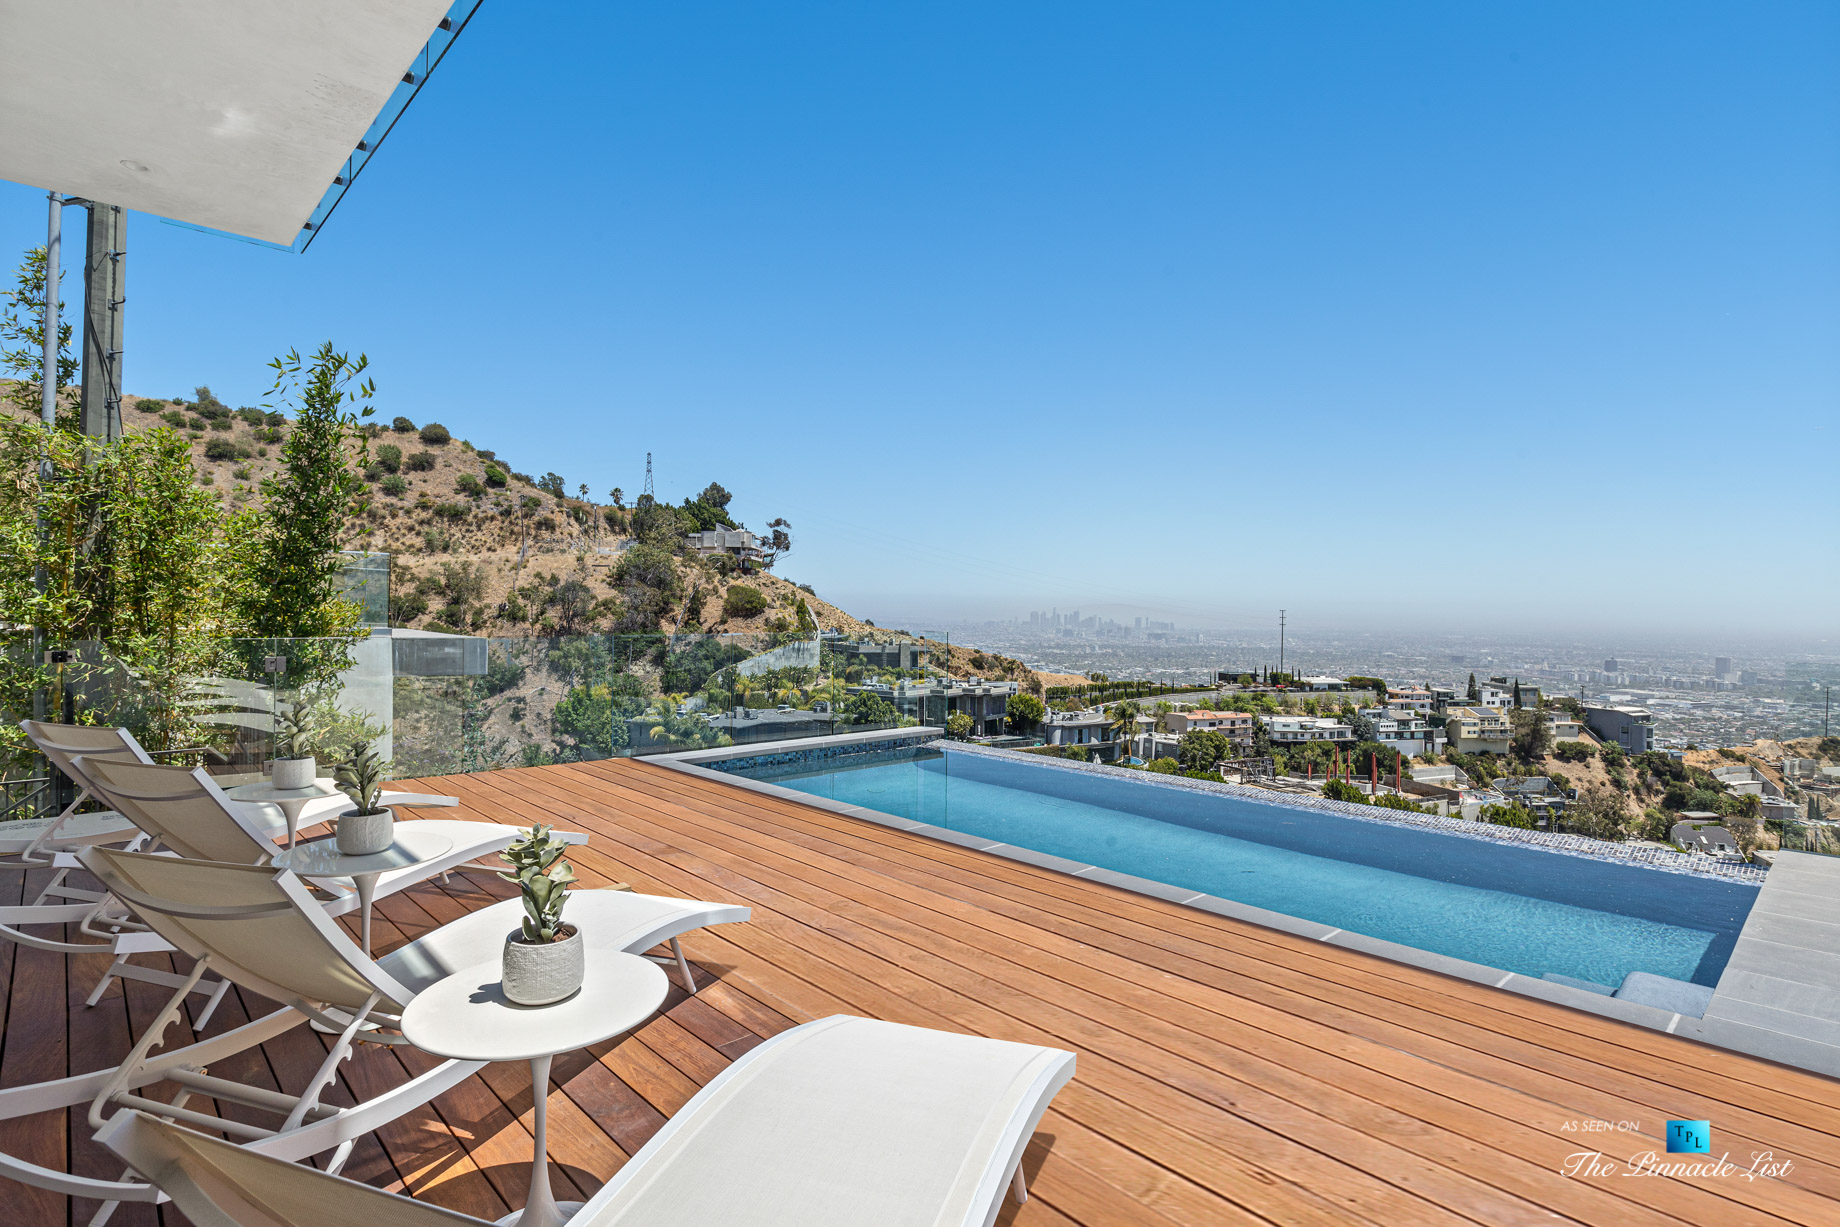 1916 Sunset Plaza Dr, Los Angeles, CA, USA - Sunset Strip - Hollywood Hills West - Luxury Real Estate